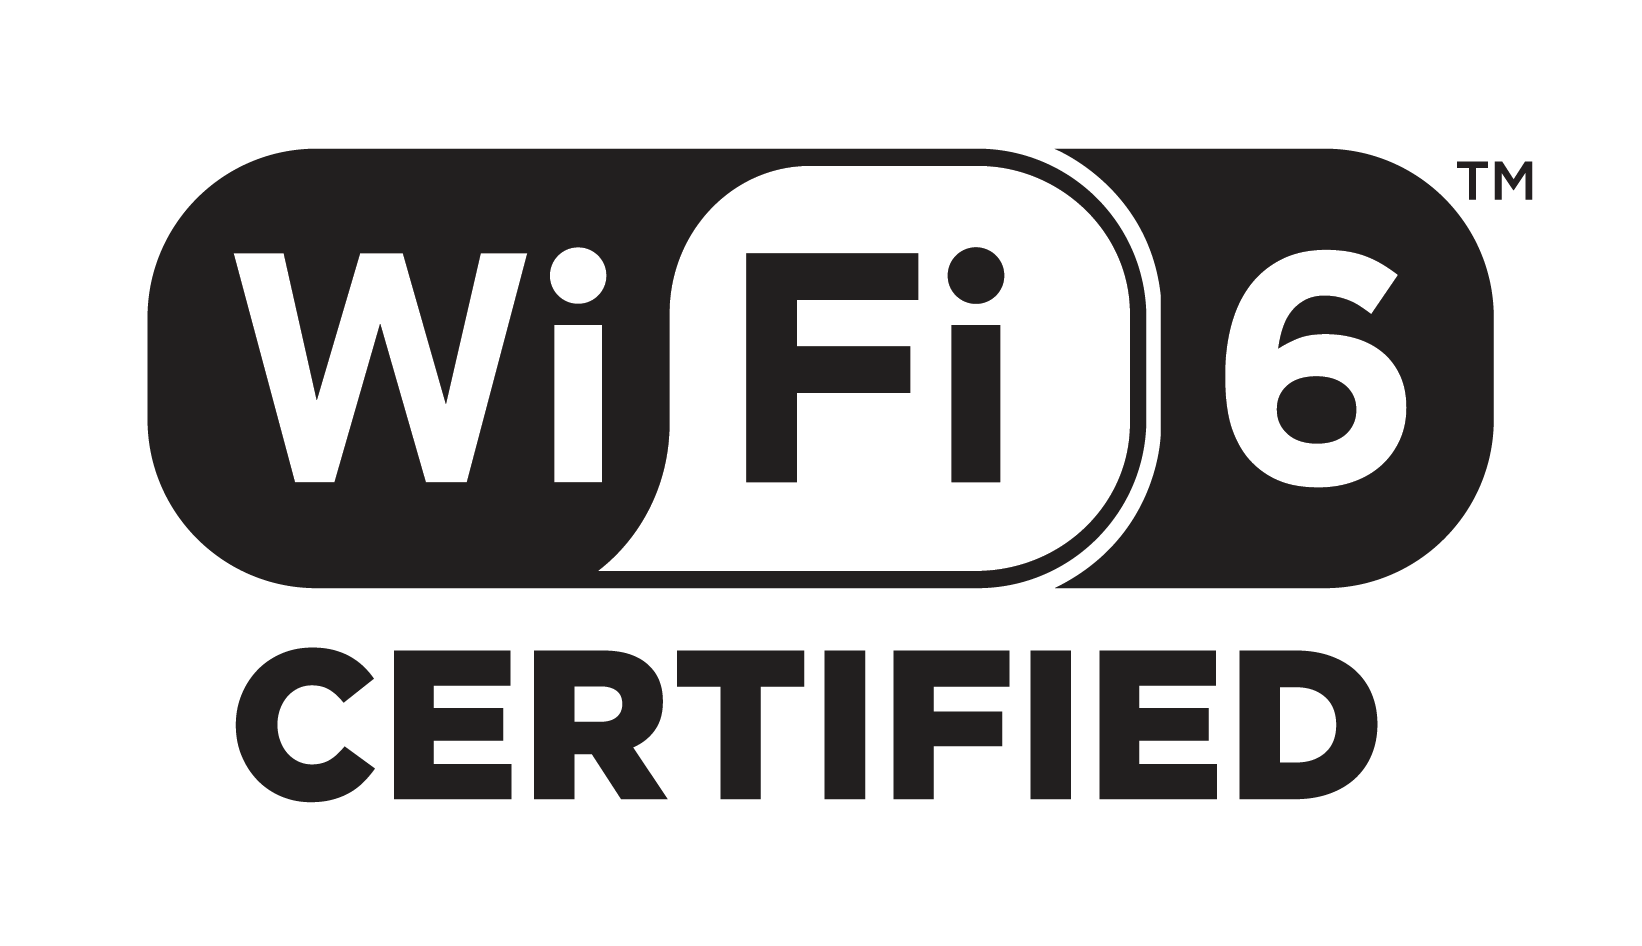 Wi-Fi download and upload connection drops every 6-8 seconds. Wi-Fi_CERTIFIED_6%E2%84%A2_high-res.png